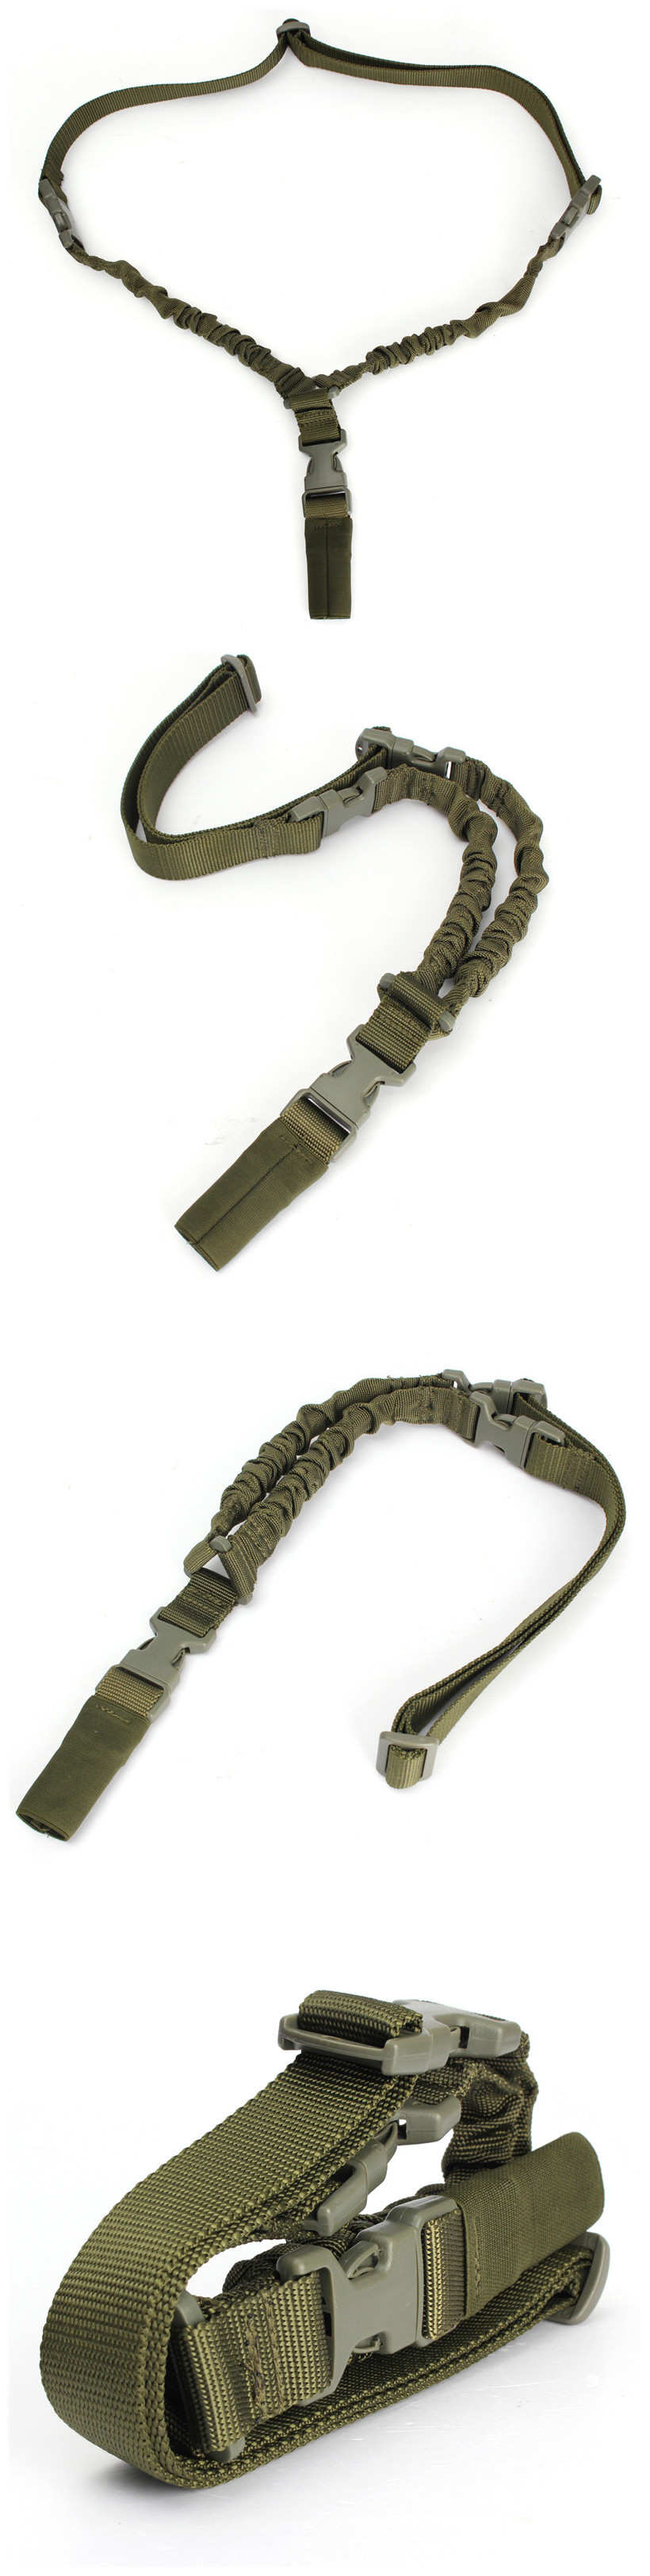 Outdoor-Sling-Two-Point-Elastic-Waist-Belt-Strap-Quick-Release-Emergency-Safety-Rescue-1050100-3